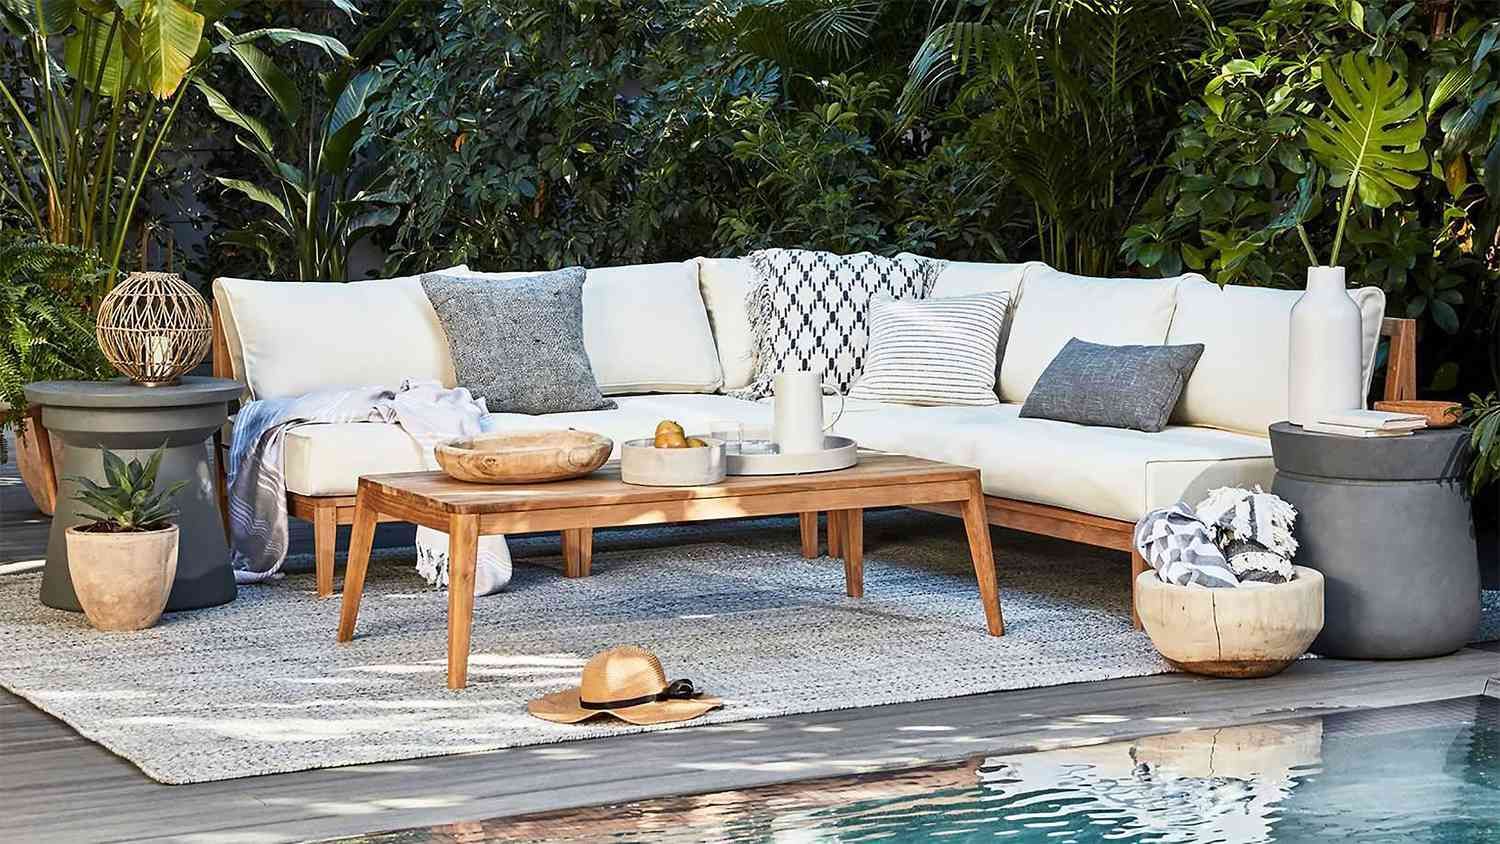 Featured Photo of The Best Outdoor Couch Cushions, Throw Pillows and Slat Coffee Table